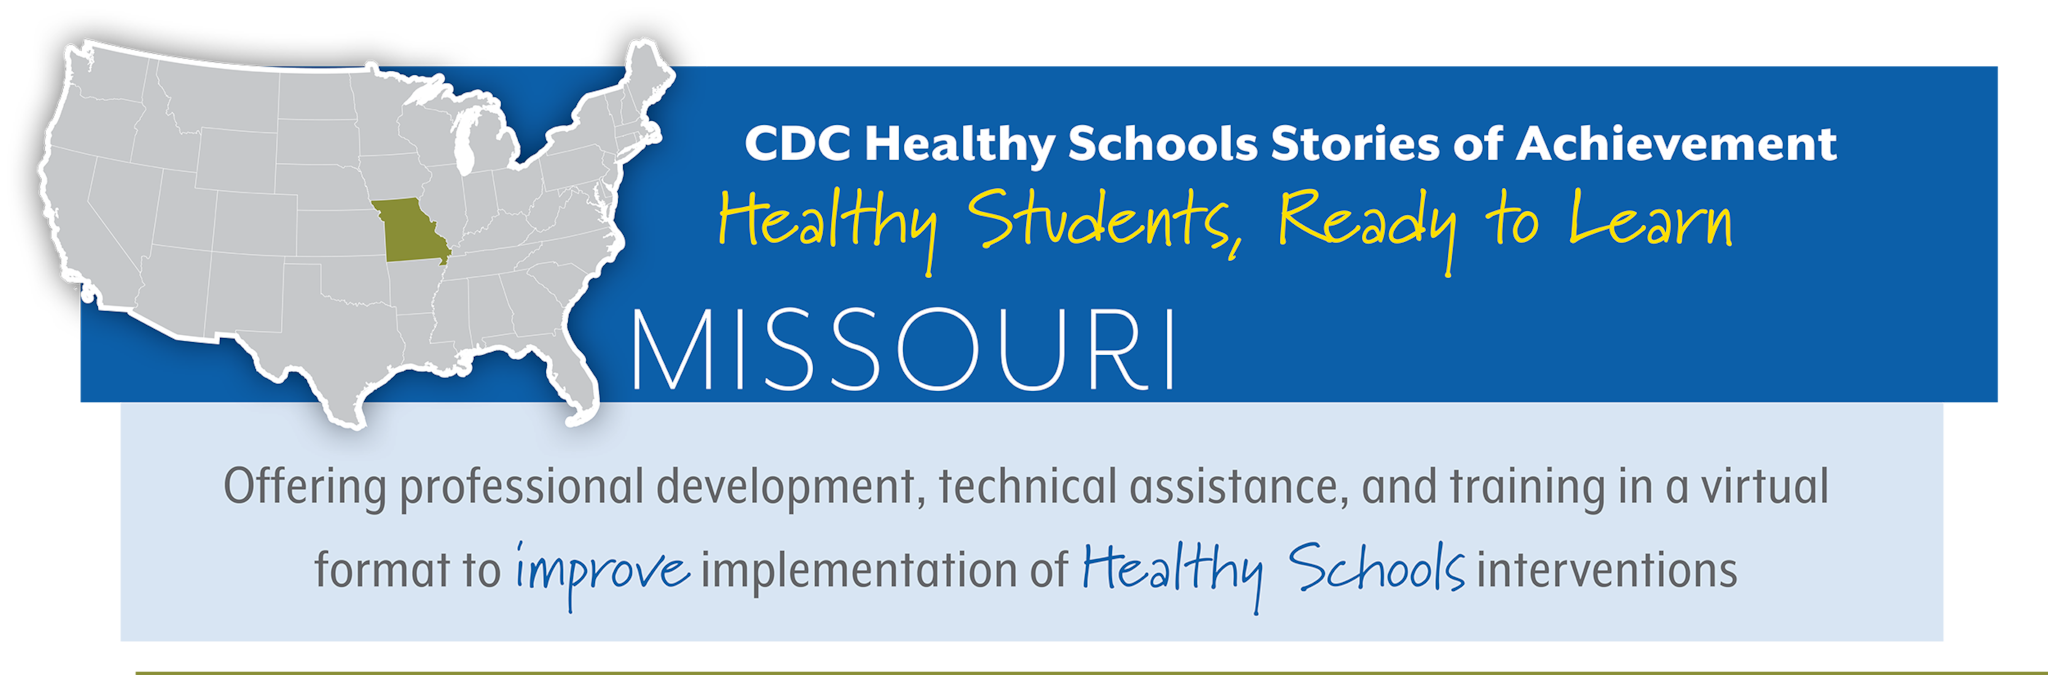 CDC Healthy Schools Stories of Achievement  Healthy Students, Ready to Learn  MISSOURI Offering professional development, technical assistance, and training in a virtual  format to improve implementation of Healthy Schools interventions